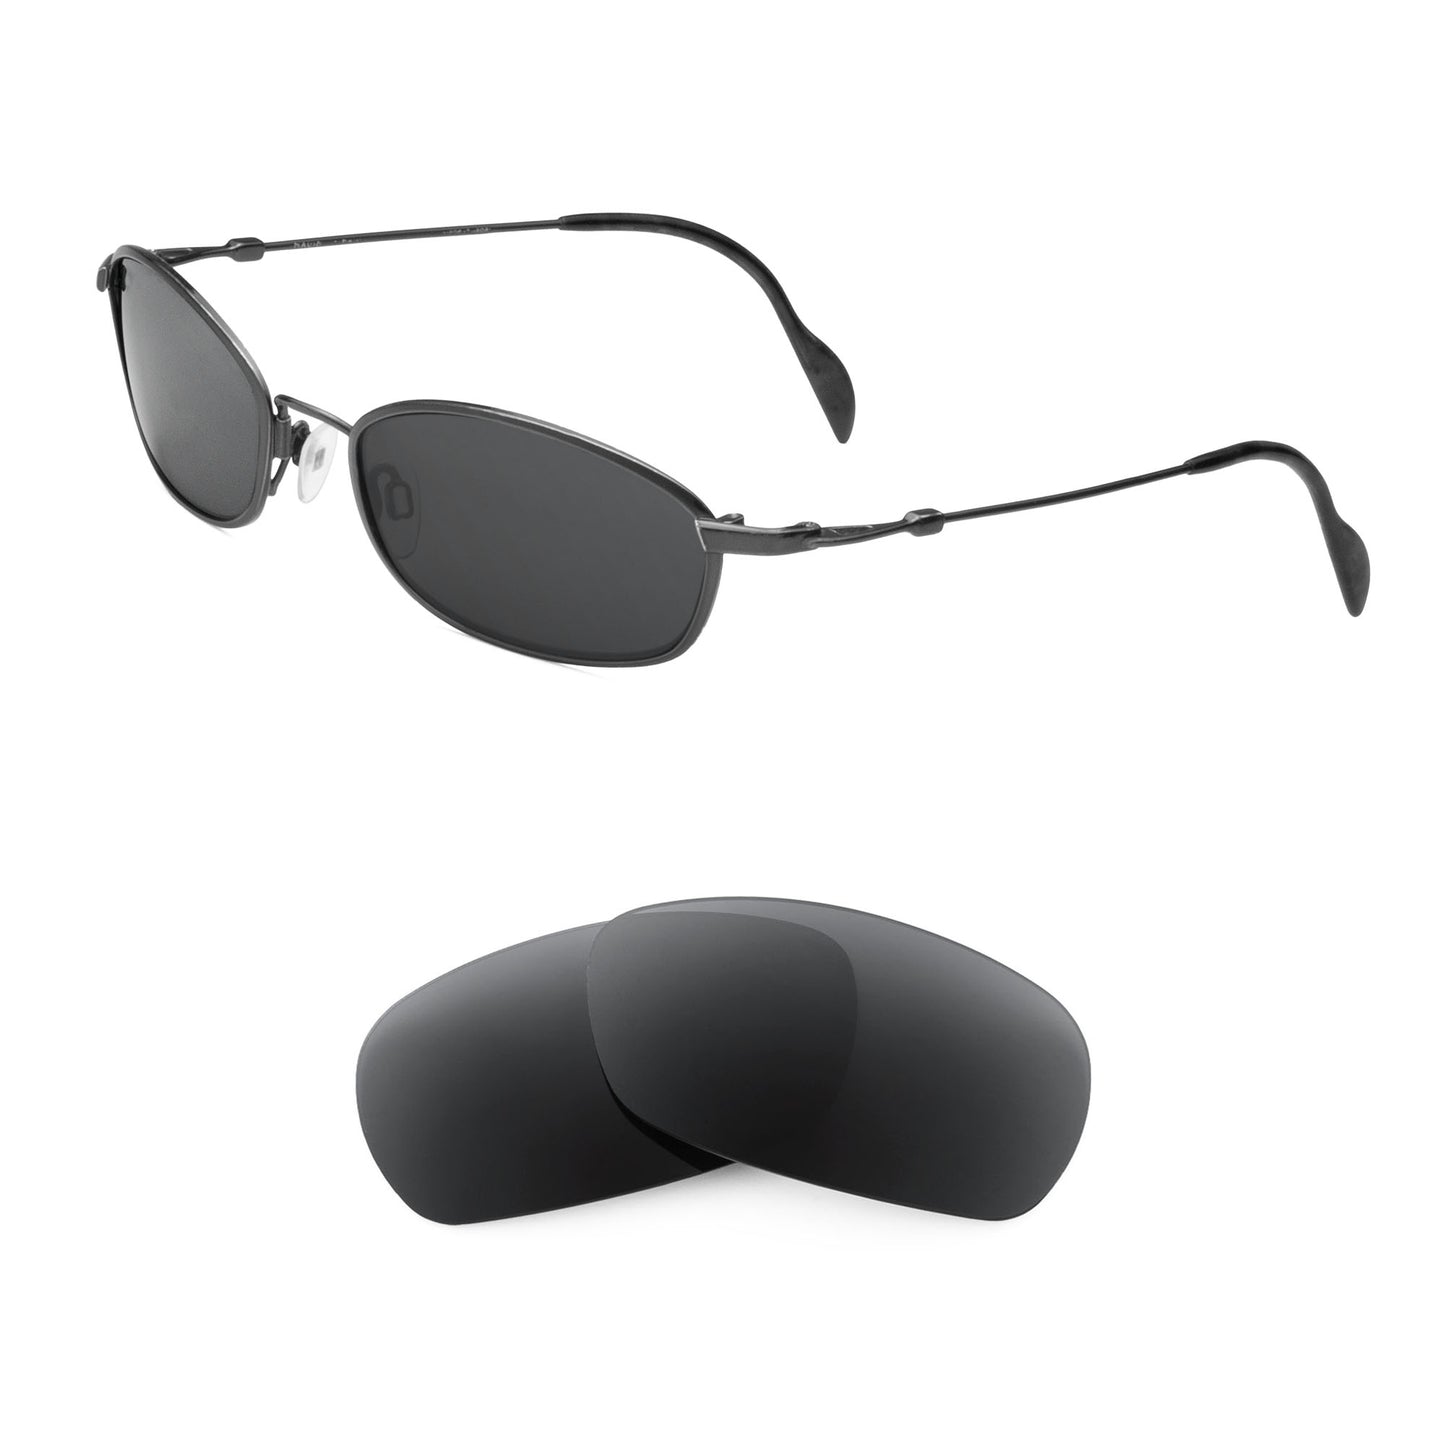 Maui Jim MJ302 sunglasses with replacement lenses